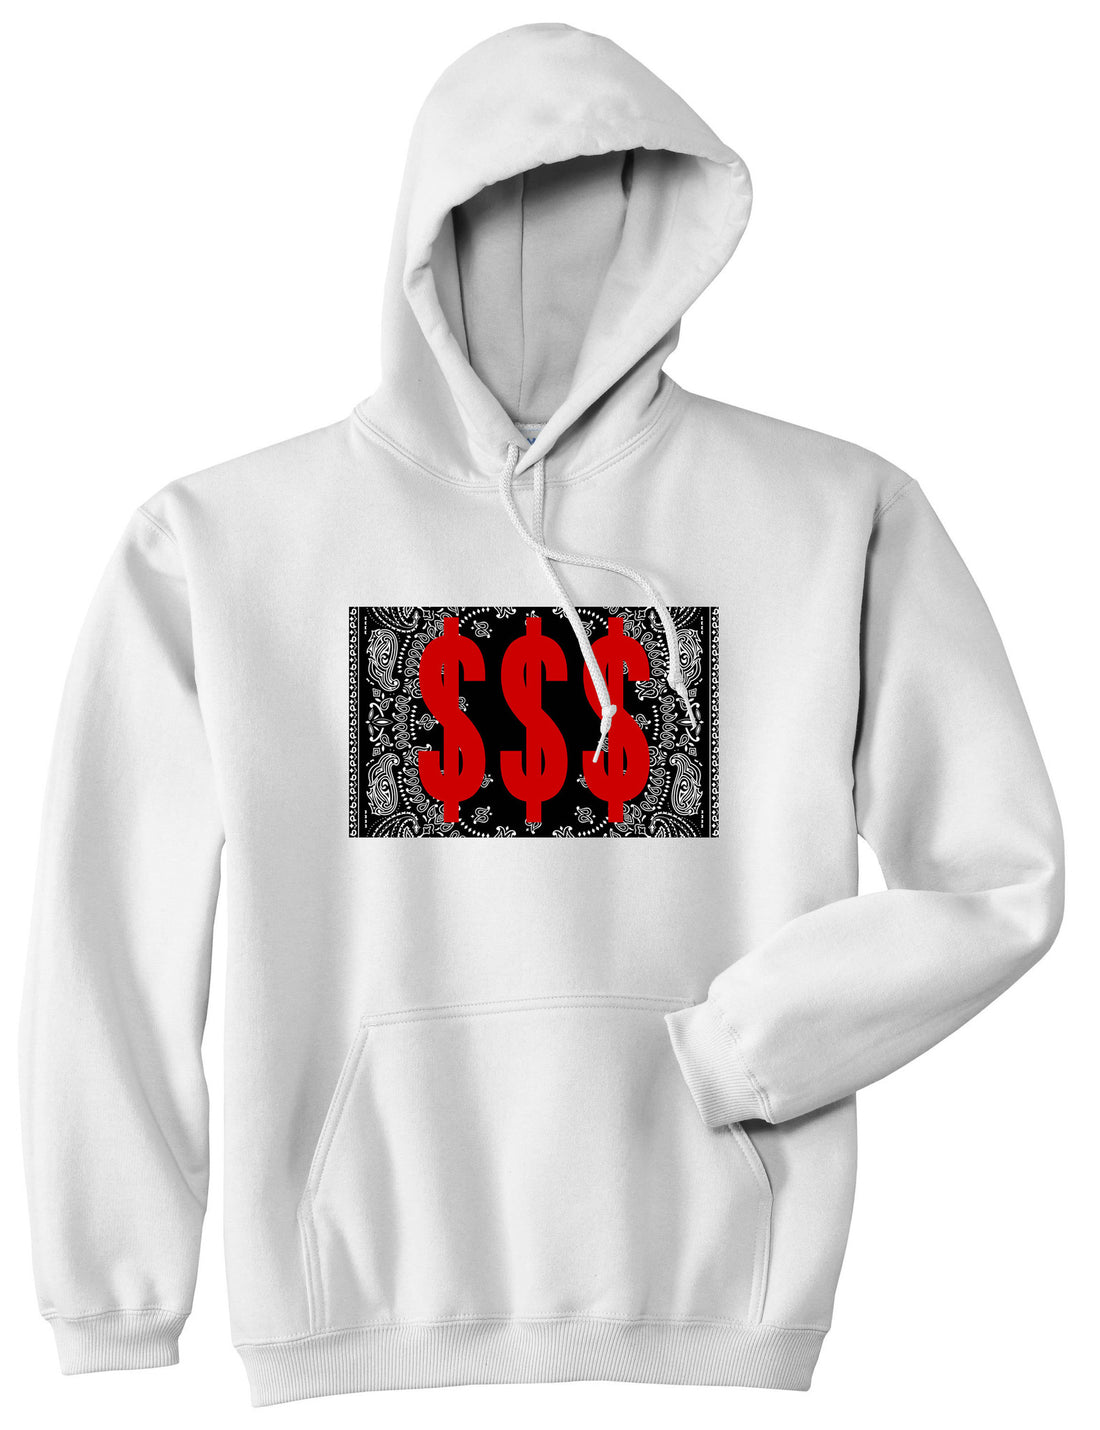 Money Bandana Gang Pullover Hoodie in White By Kings Of NY